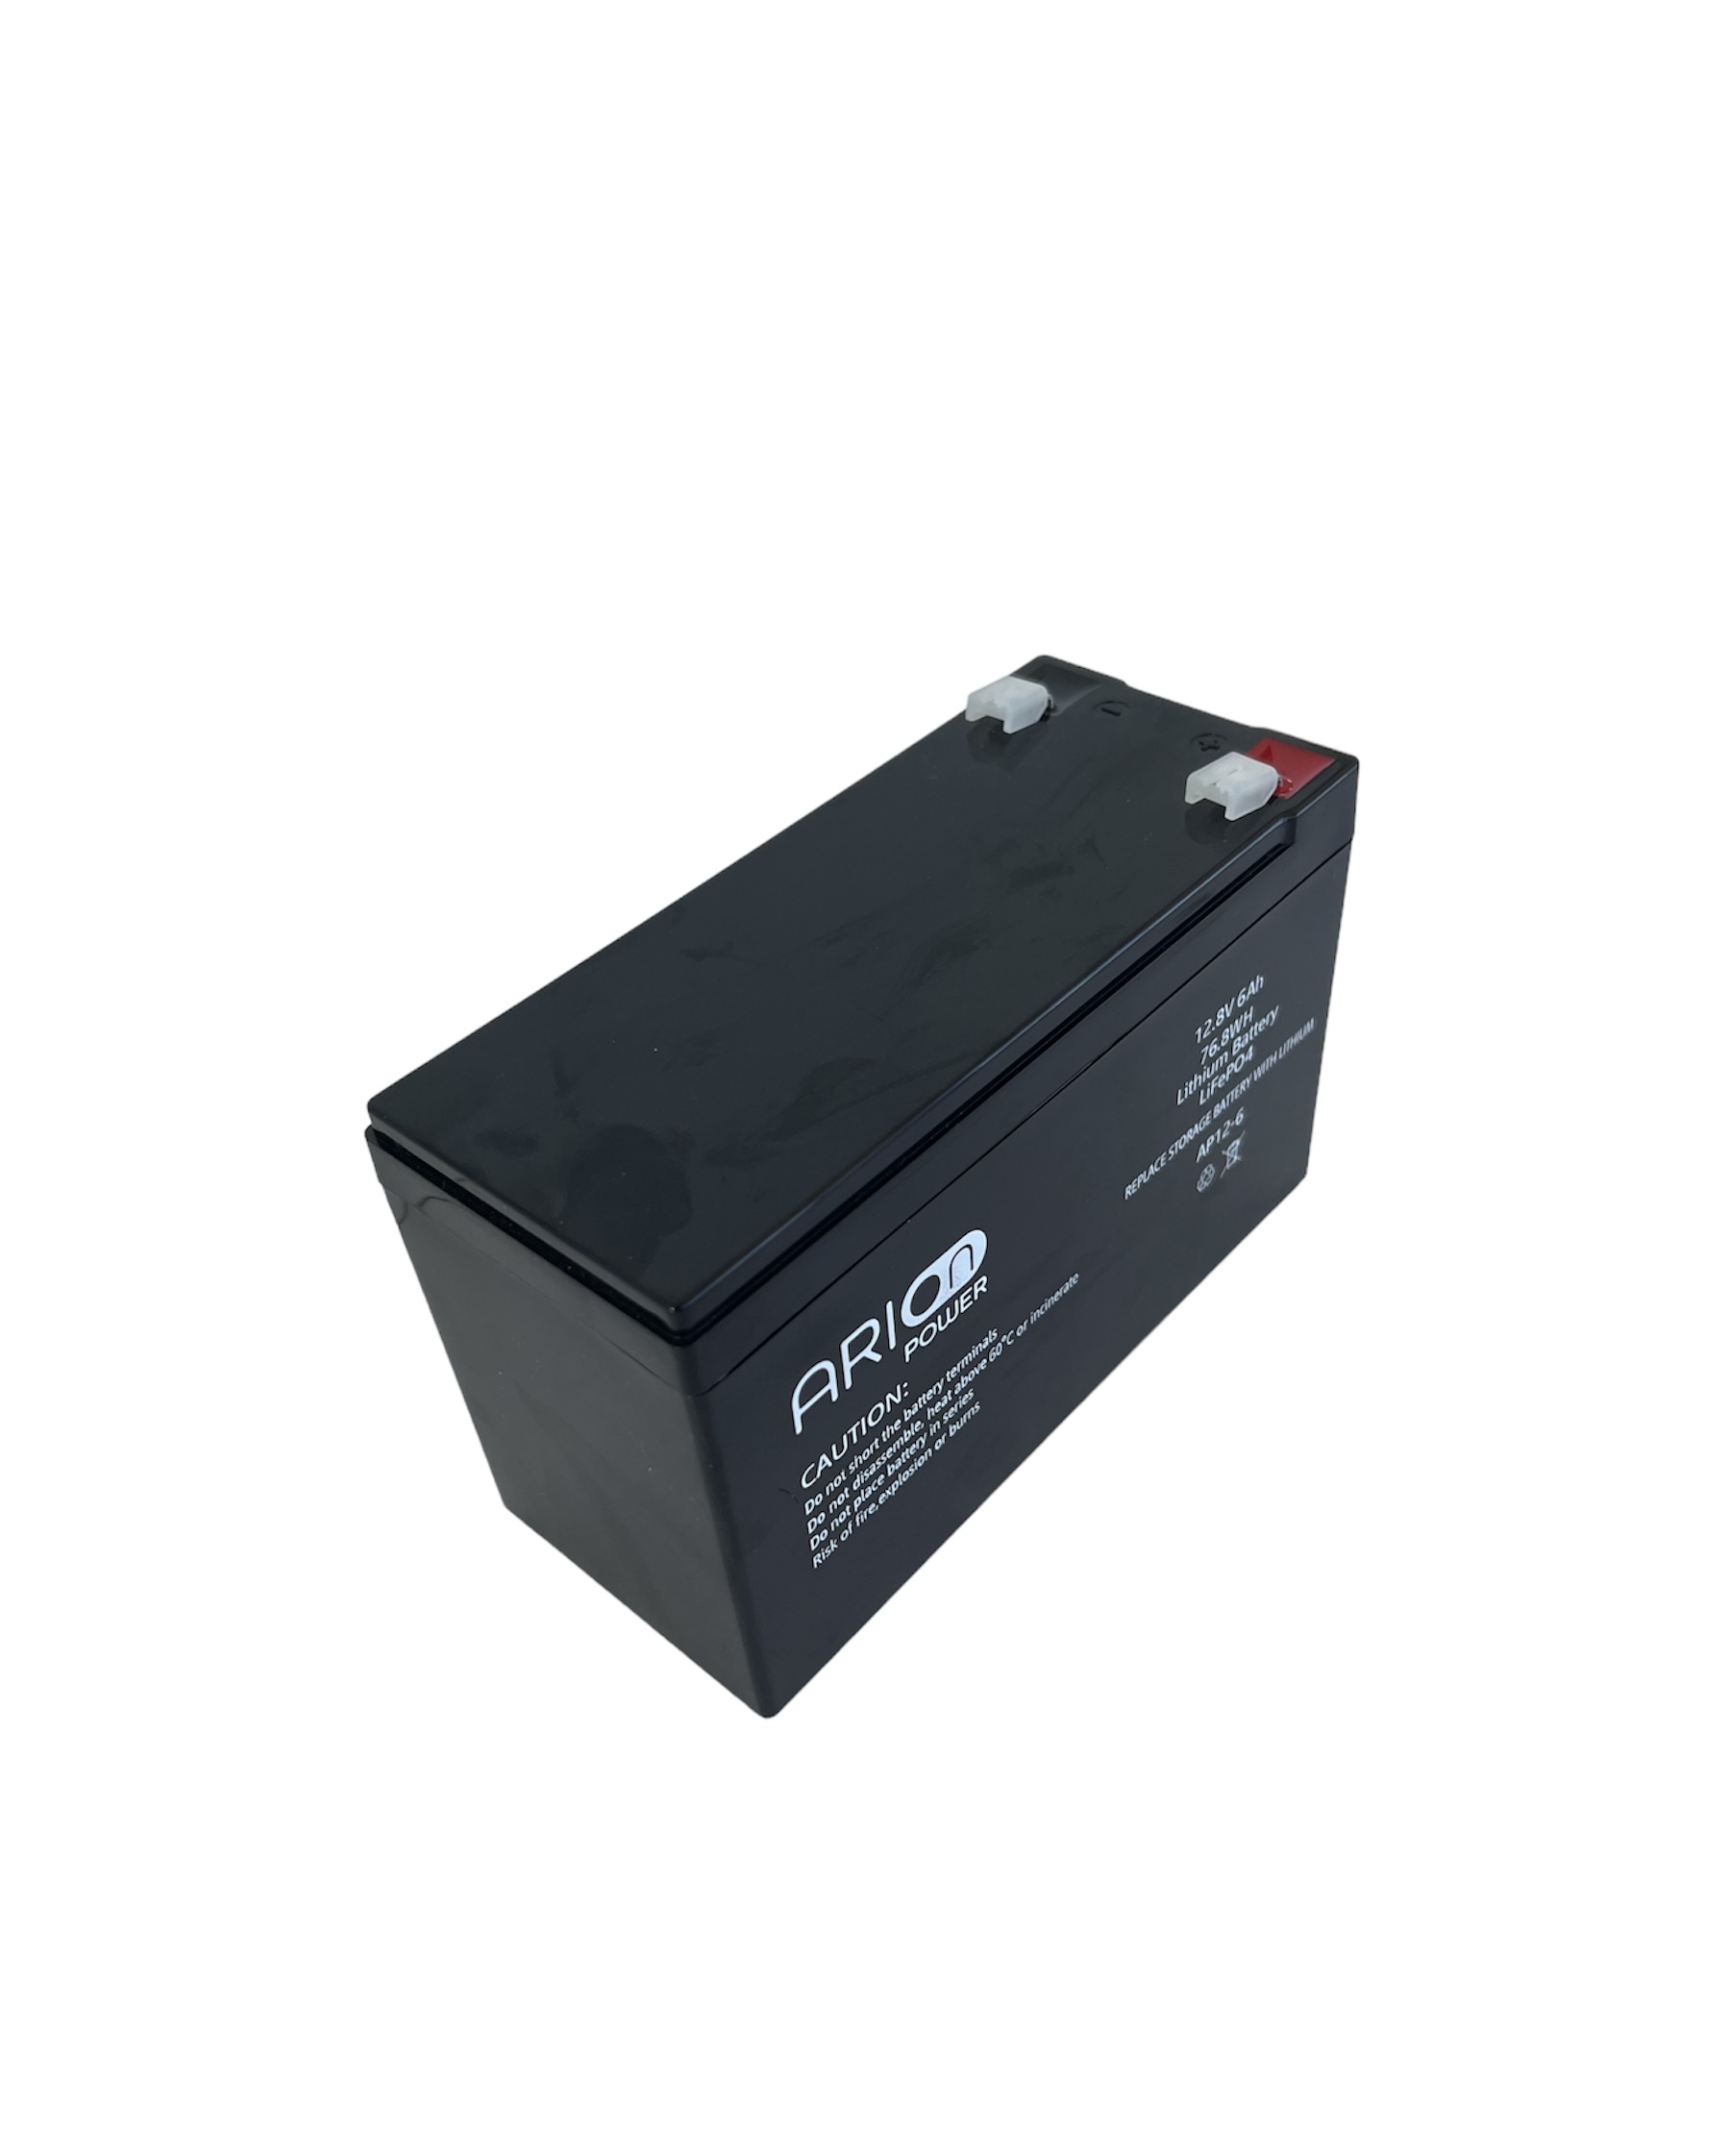 Arion Power 12.8V 6AH Lithium Iron Phosphate Battery (LiFePO4)